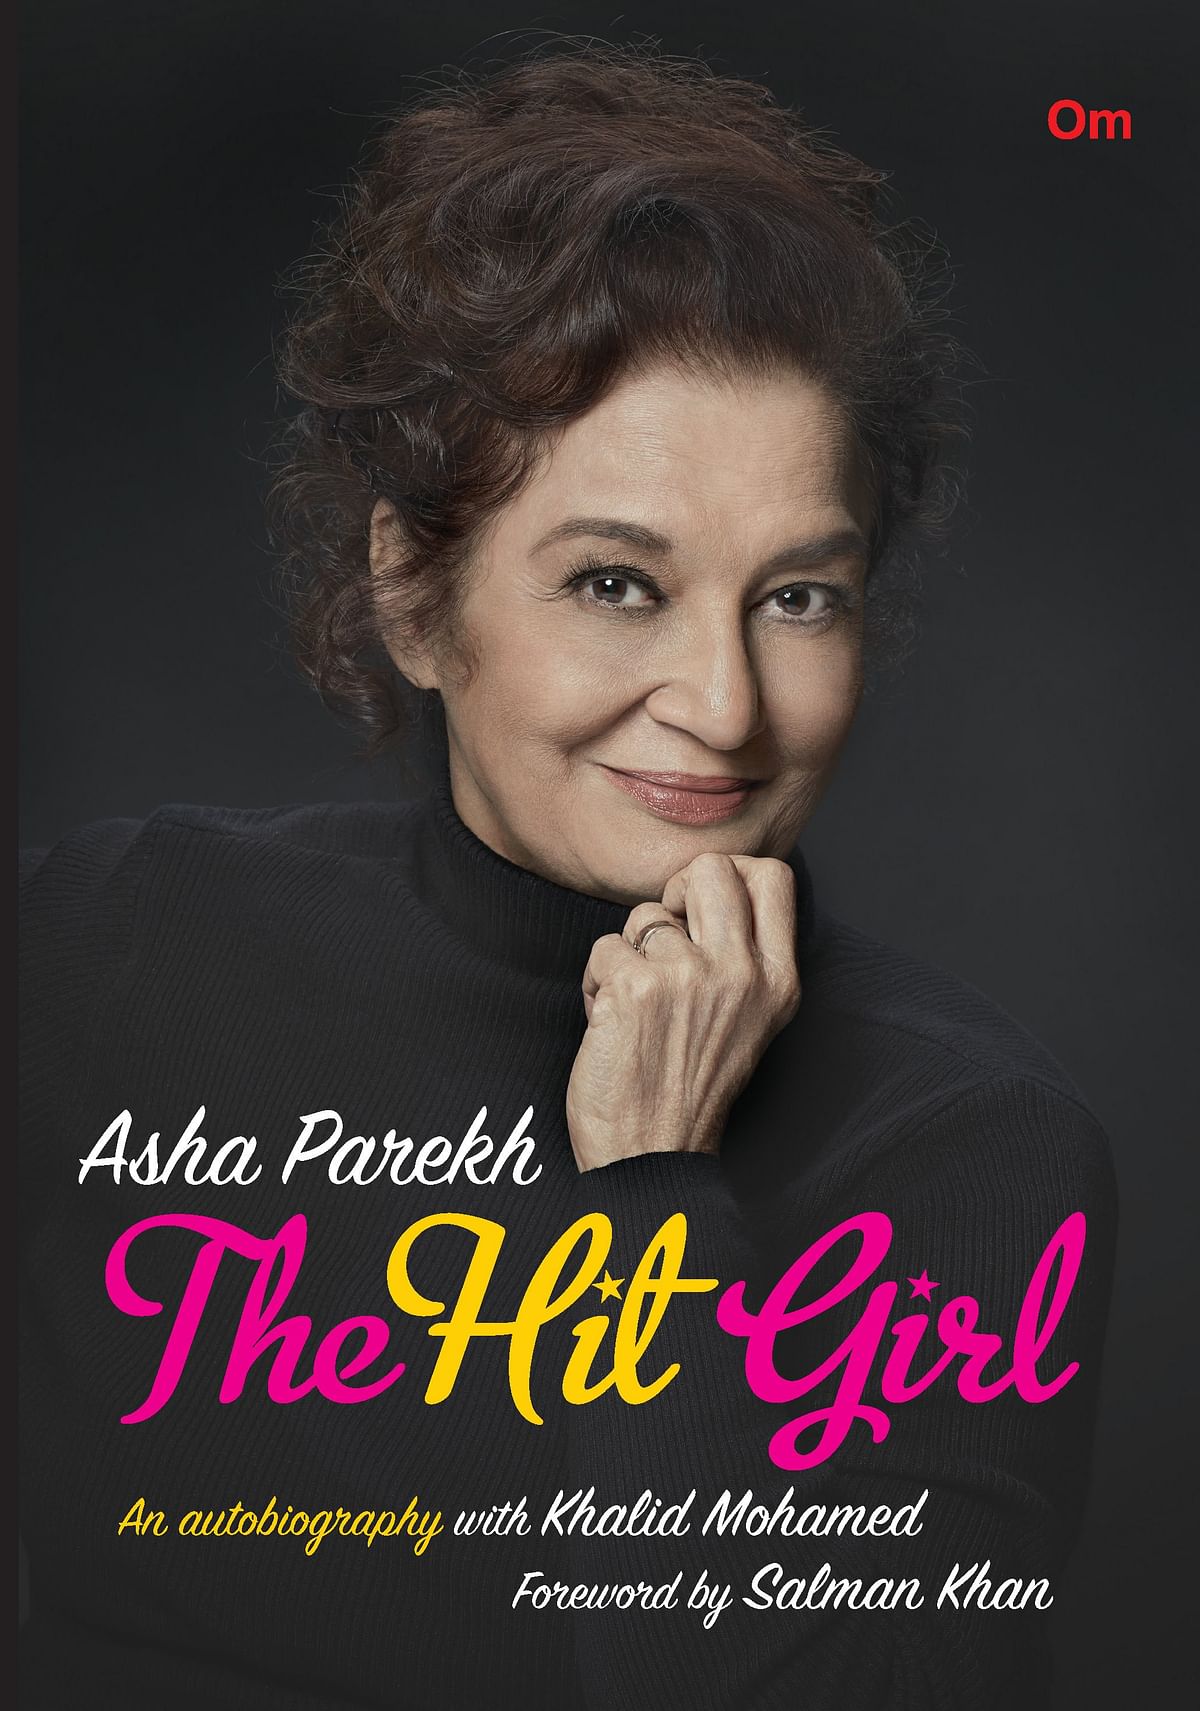 An exclusive excerpt from actress Asha Parekh’s autobiography, ‘The Hit Girl’.